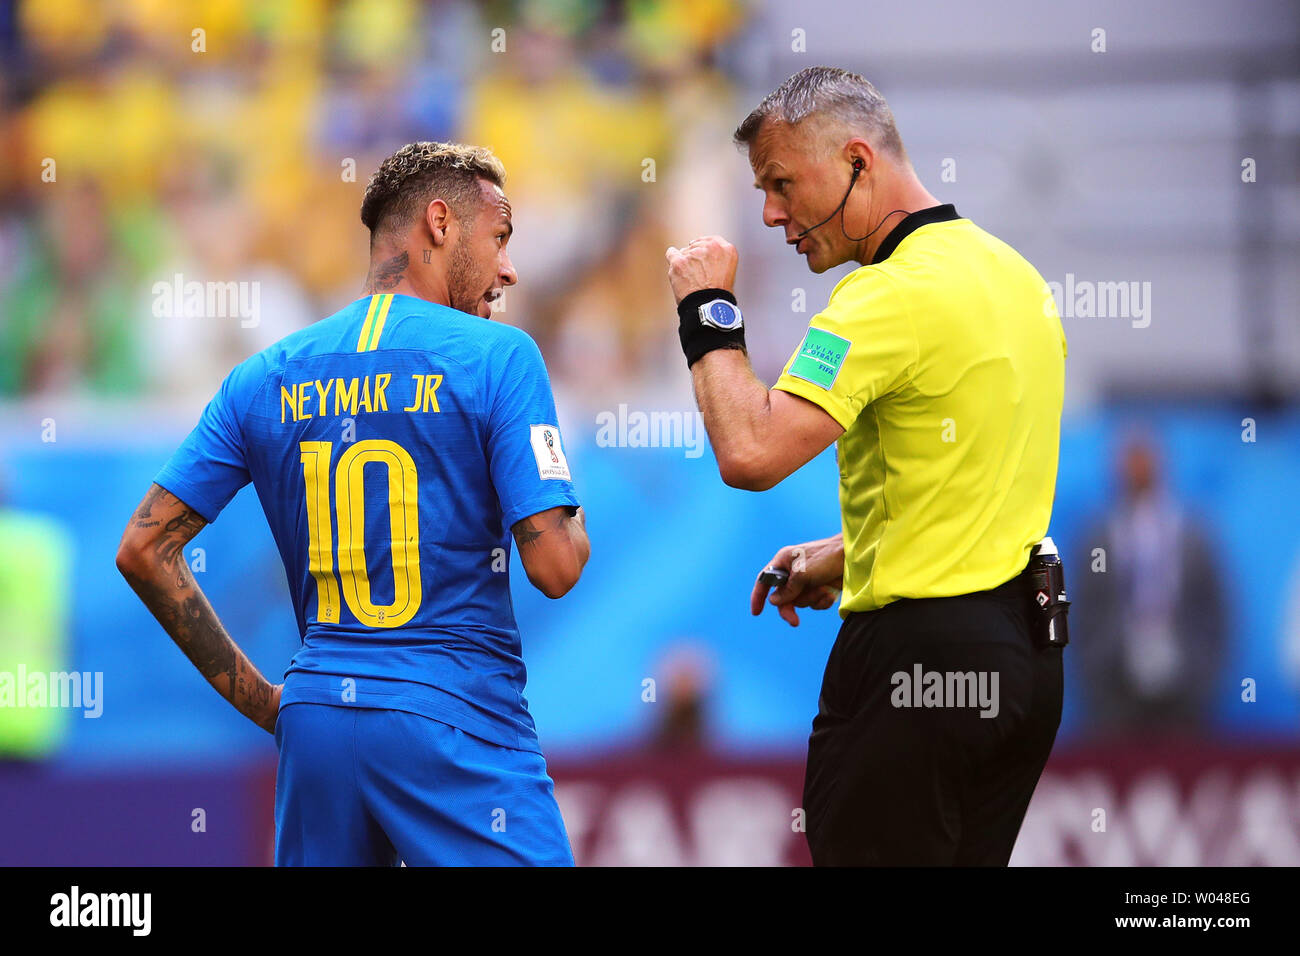 Neymar of Brazil is spoken to by referee Bjorn Kuipers during the 2018 FIFA World Cup Group E match at the Saint Petersburg Stadium in Saint Petersburg, Russia on June 22, 2018. Brazil defeated Costa Rica 2-0.      Photo by Chris Brunskill/UPI Stock Photo